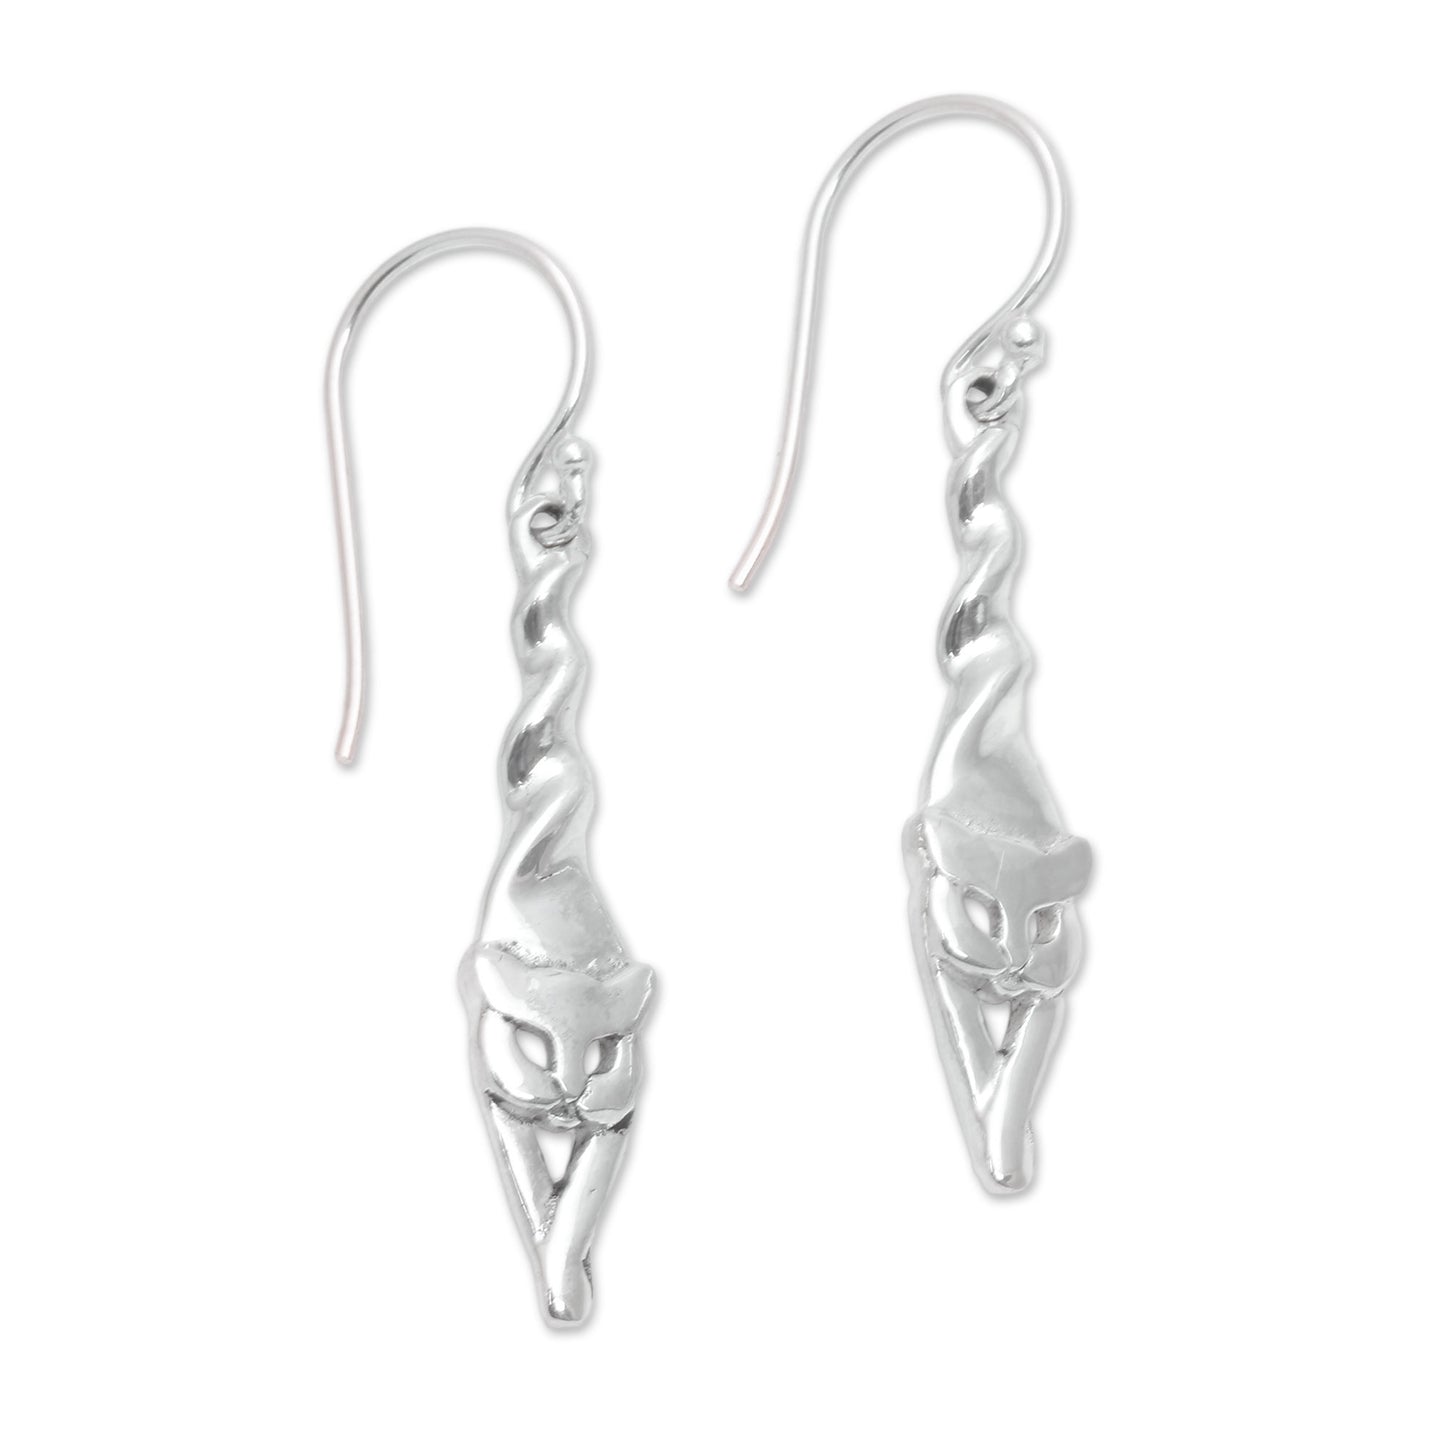 Kitty Stretch Sterling Silver Cat Dangle Earrings Crafted in Bali